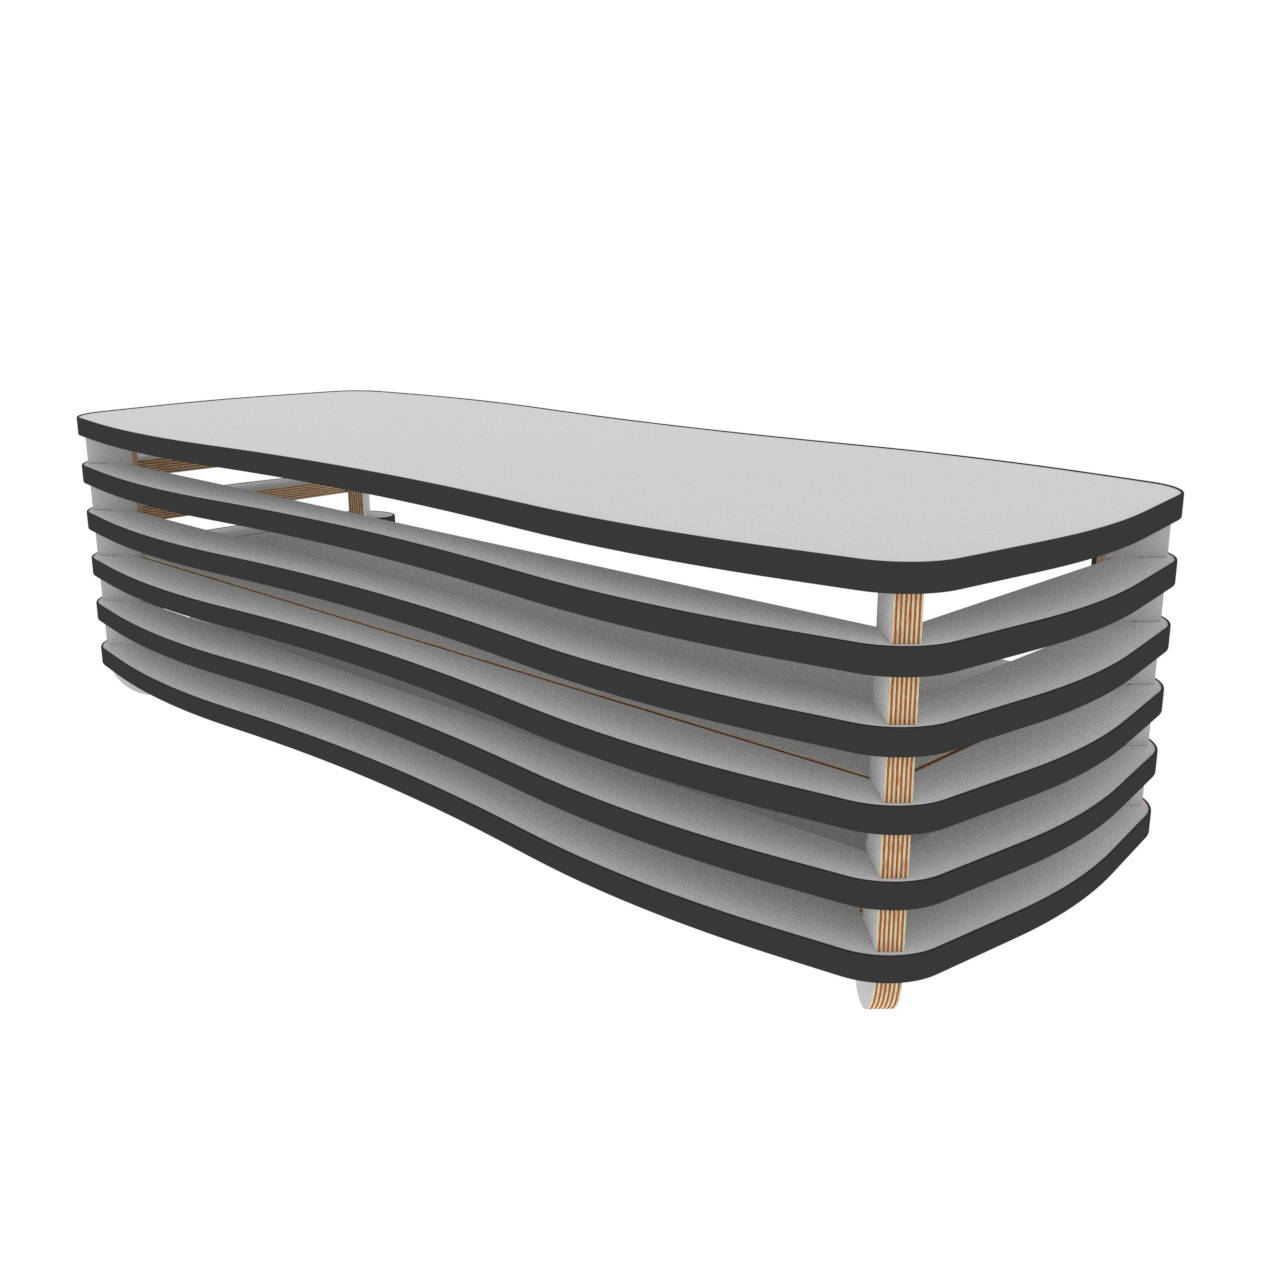 My wavy style TV rack design preview image 1